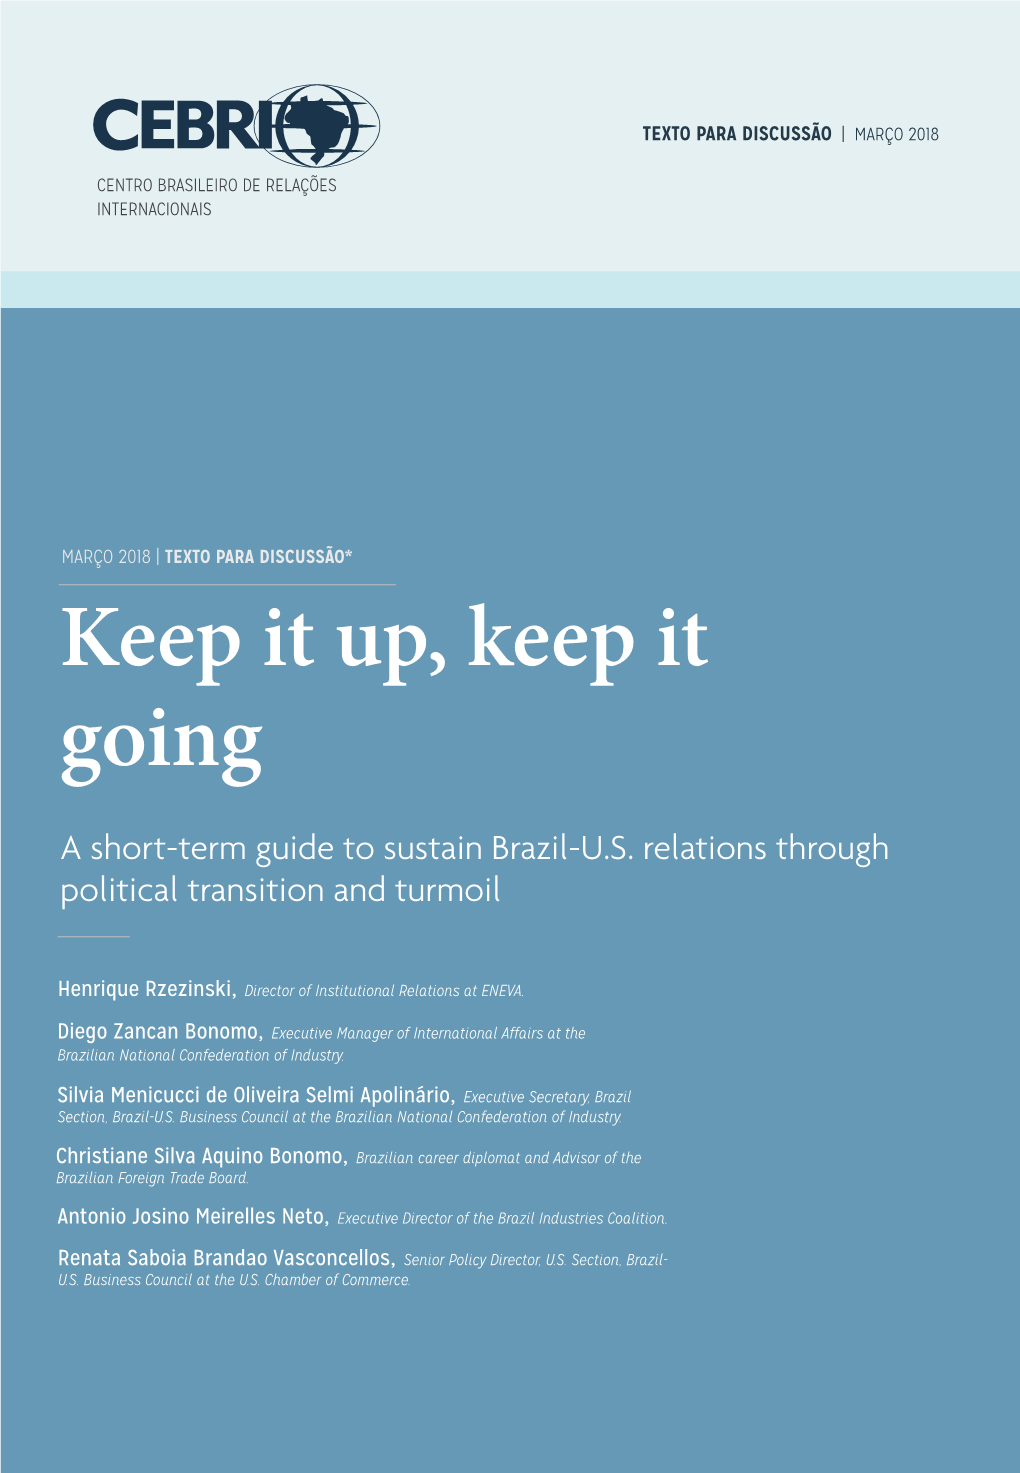 Keep It Up, Keep It Going a Short-Term Guide to Sustain Brazil-U.S